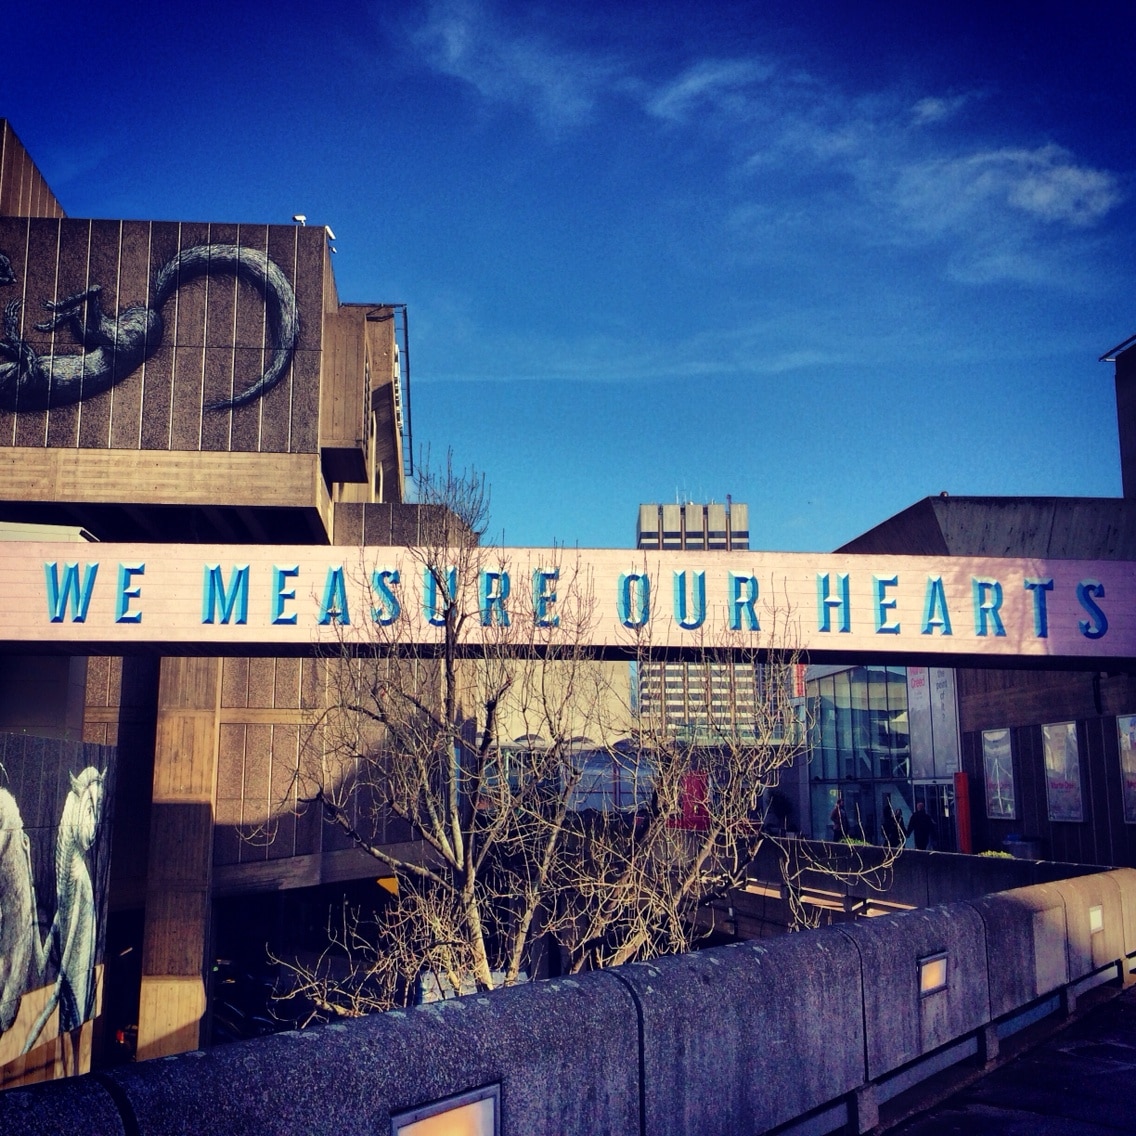 We measure our hearts graffiti by street artist Phlegm on the South Bank!